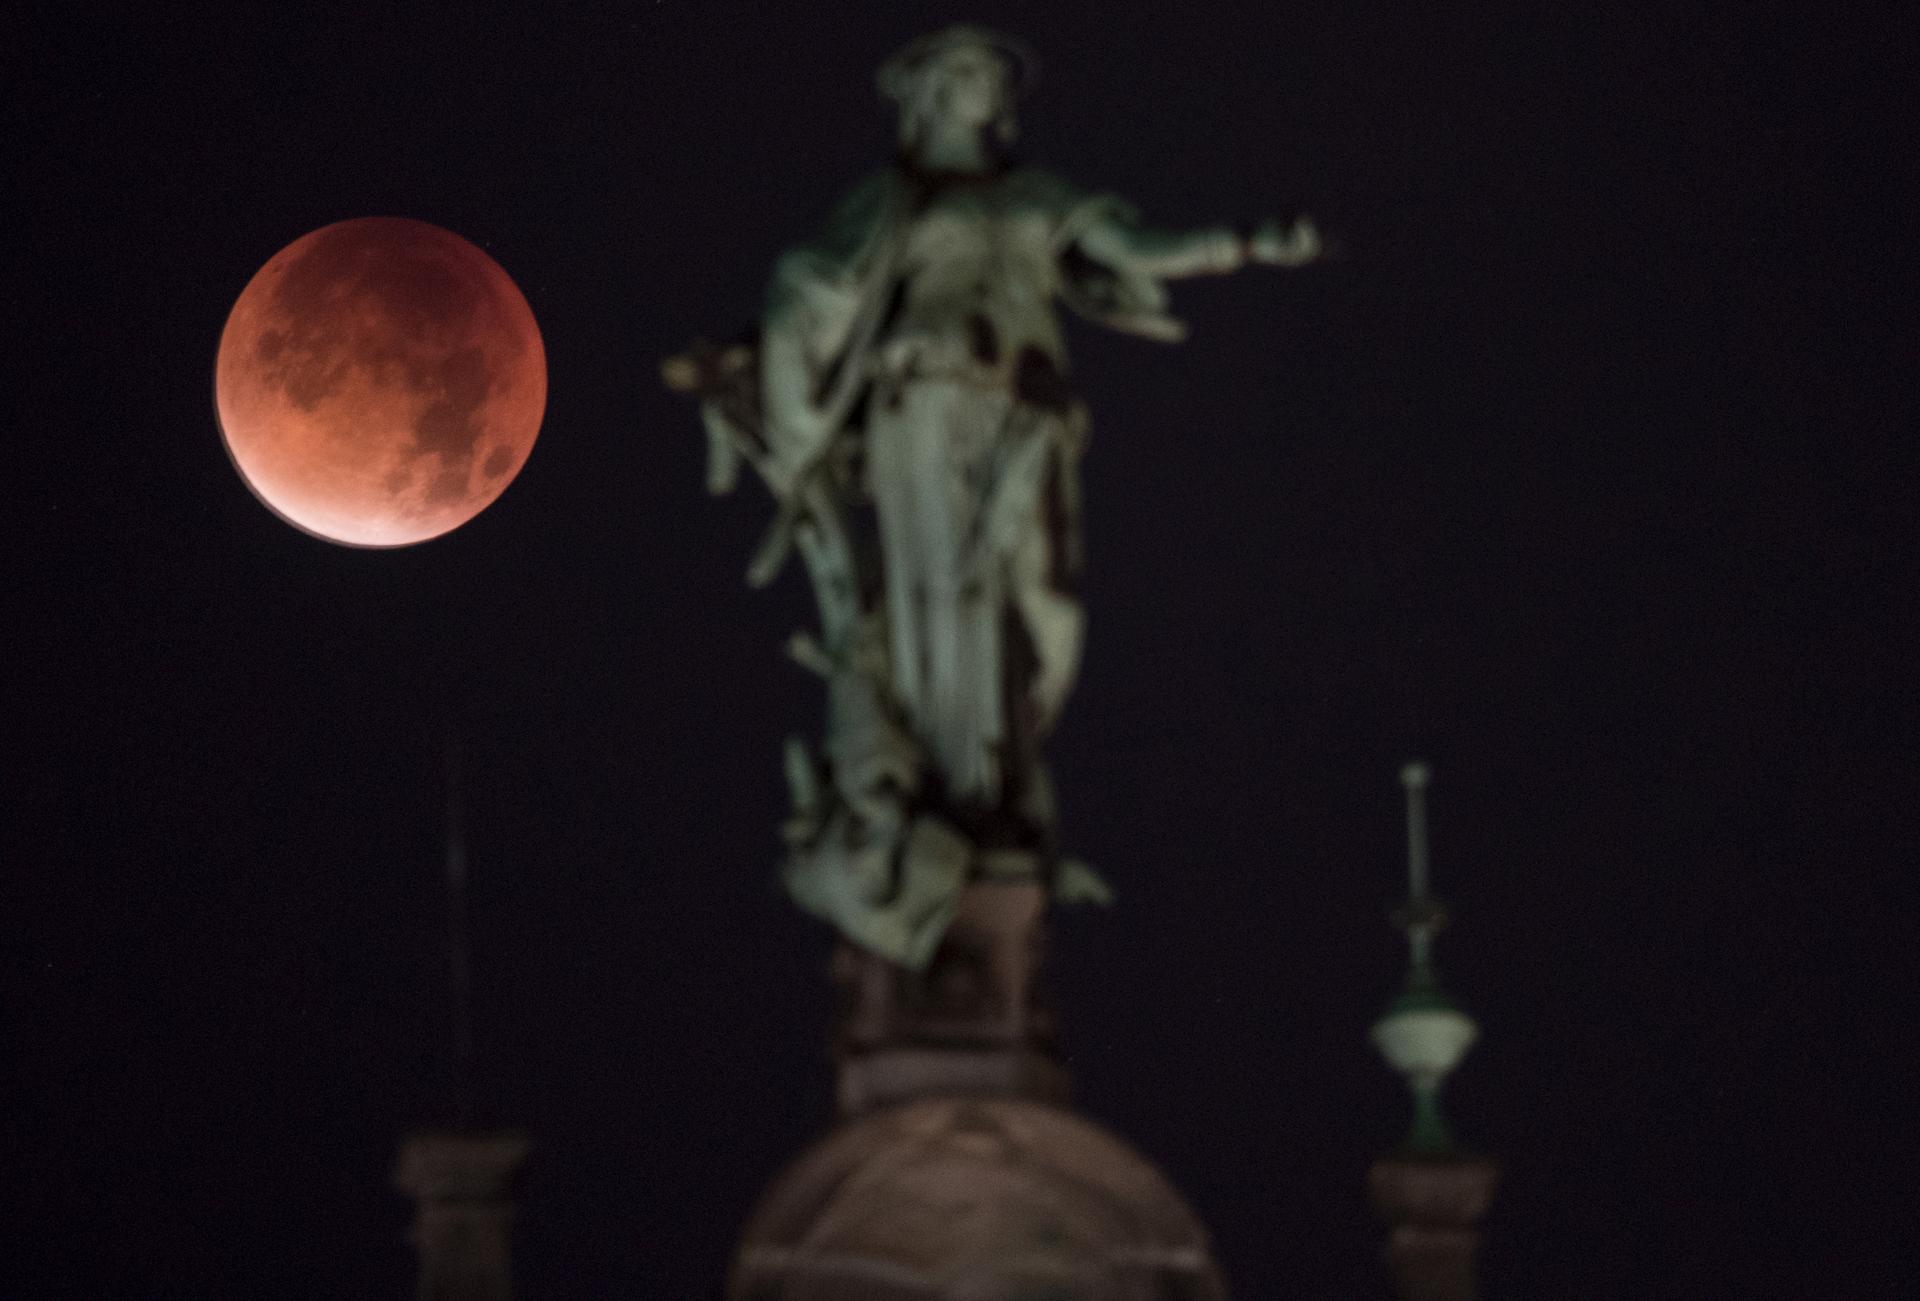 The moon, appearing in a dim red color, is covered by the Earth's shadow during a total lunar eclipse over a staute at the roof of the town hall in Hamburg, Germany.